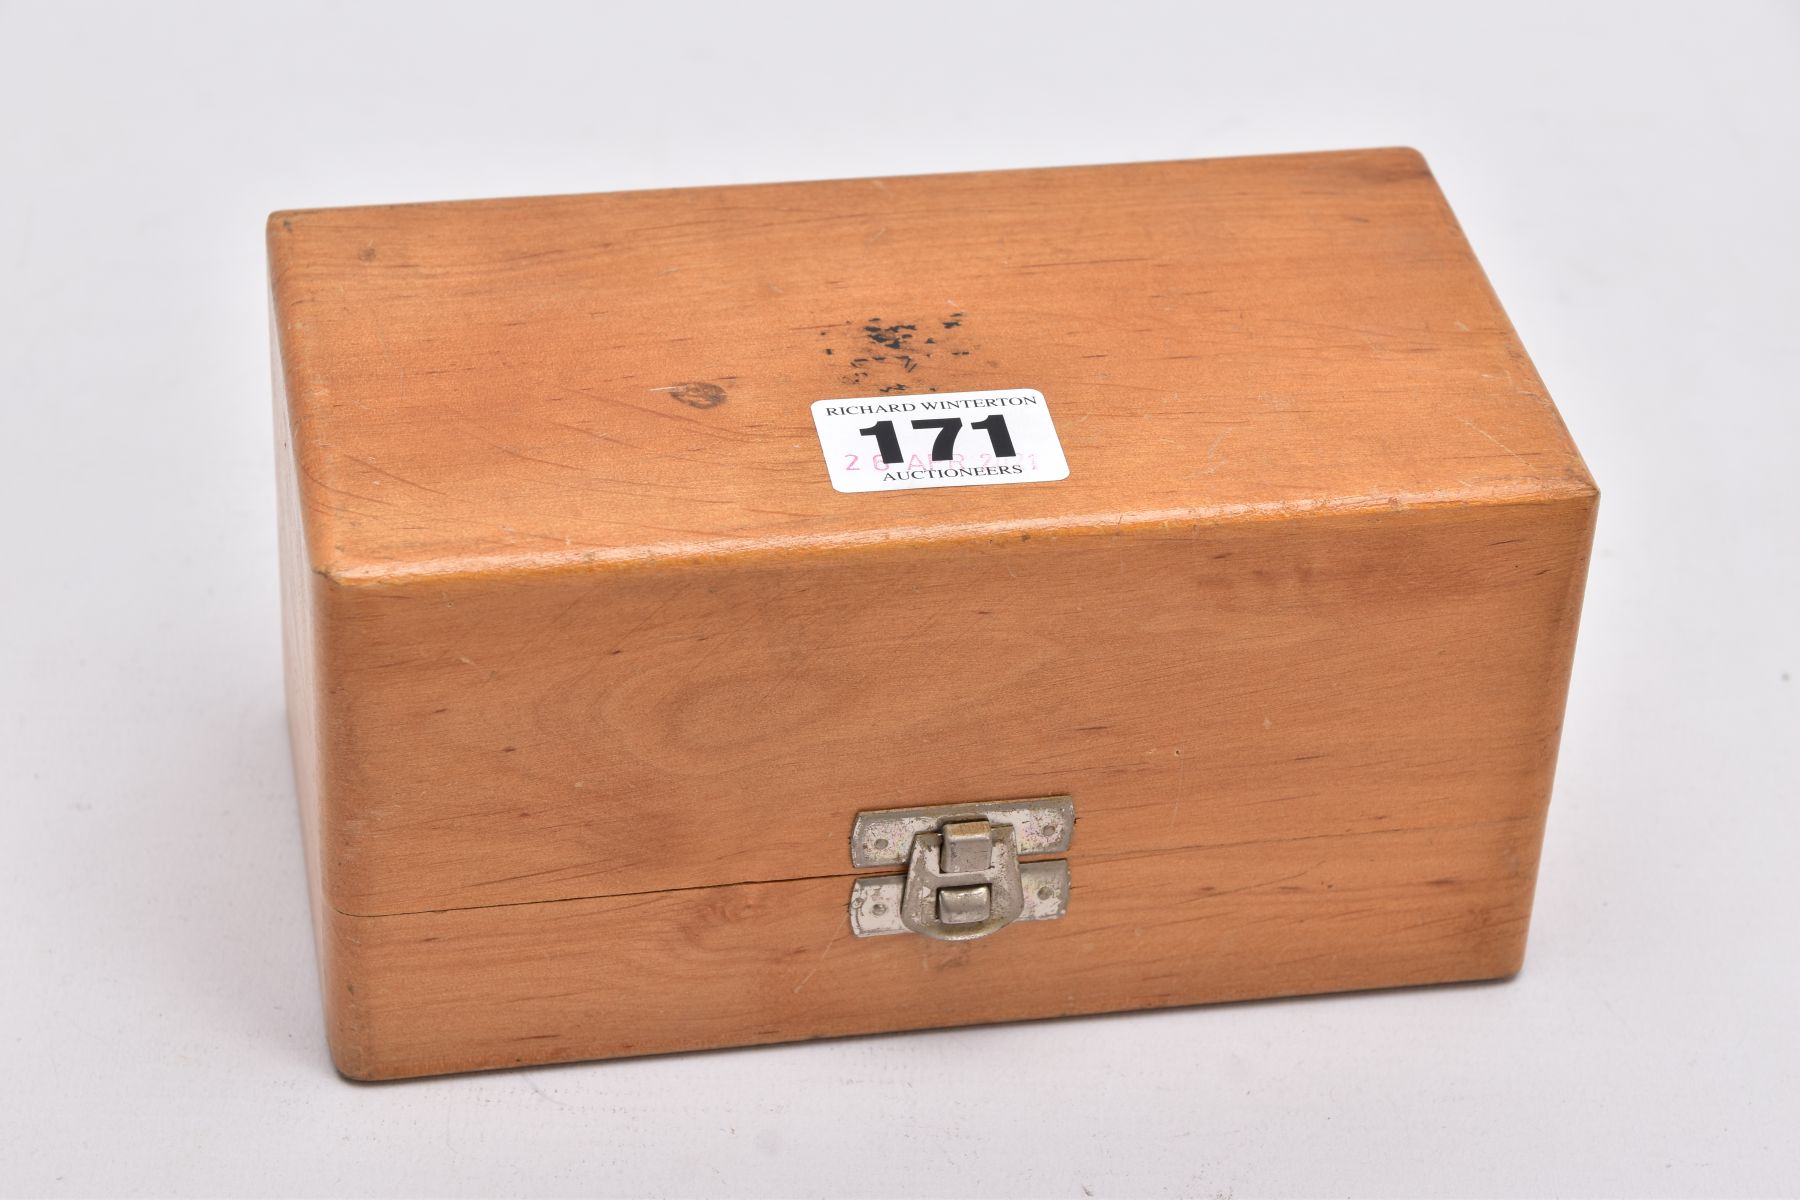 A 'JKA FEINTASTER' PRECISION MIRCOMETER DIAL GAUGE, fitted within original box - Image 12 of 12